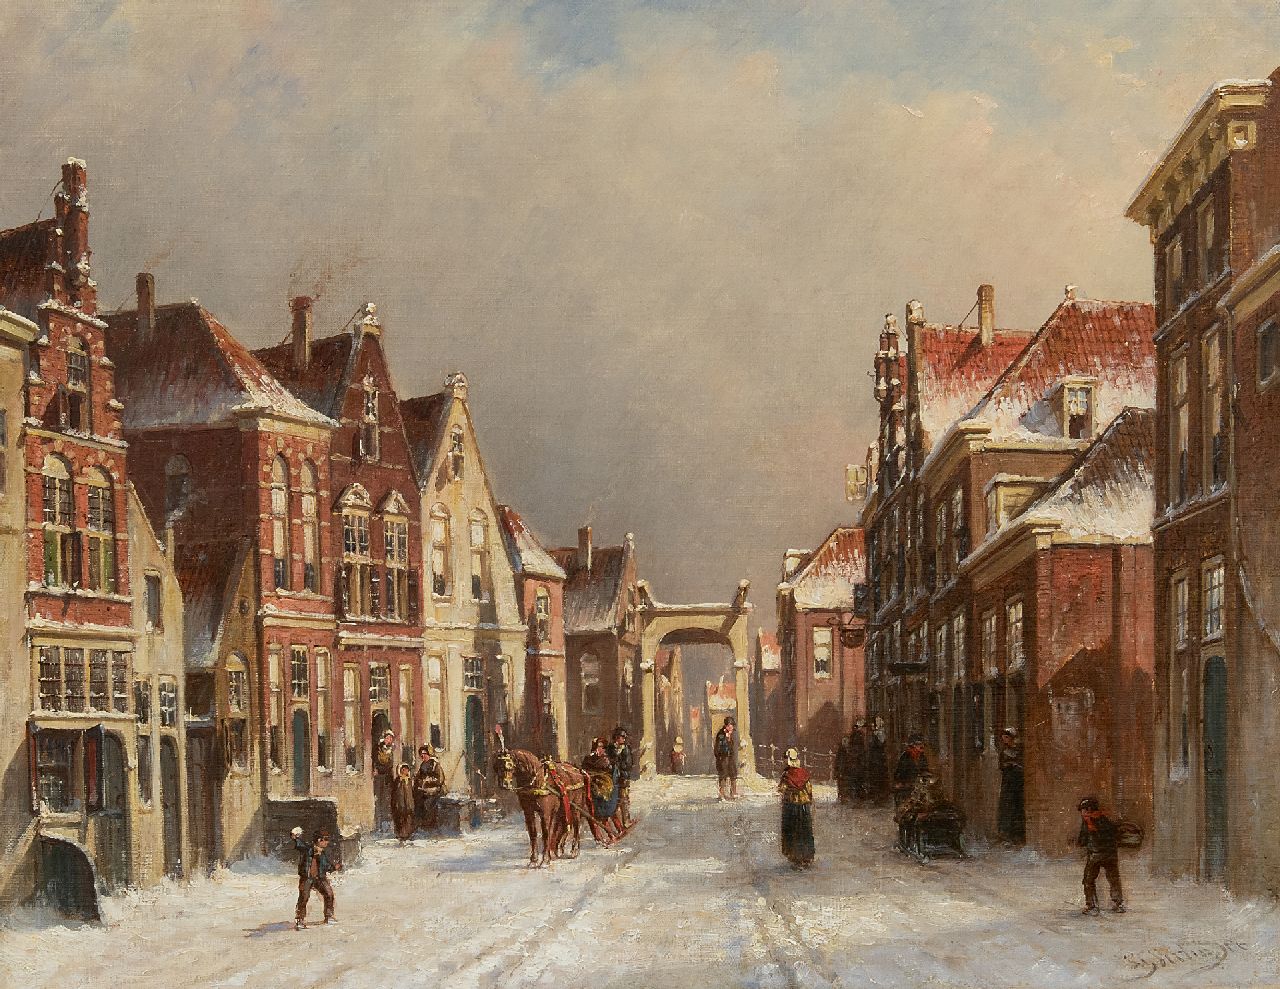 Vertin P.G.  | Petrus Gerardus Vertin | Paintings offered for sale | A snowy street with a drawbridge (possibly Edam), oil on canvas 36.3 x 45.5 cm, signed l.r. and dated '86